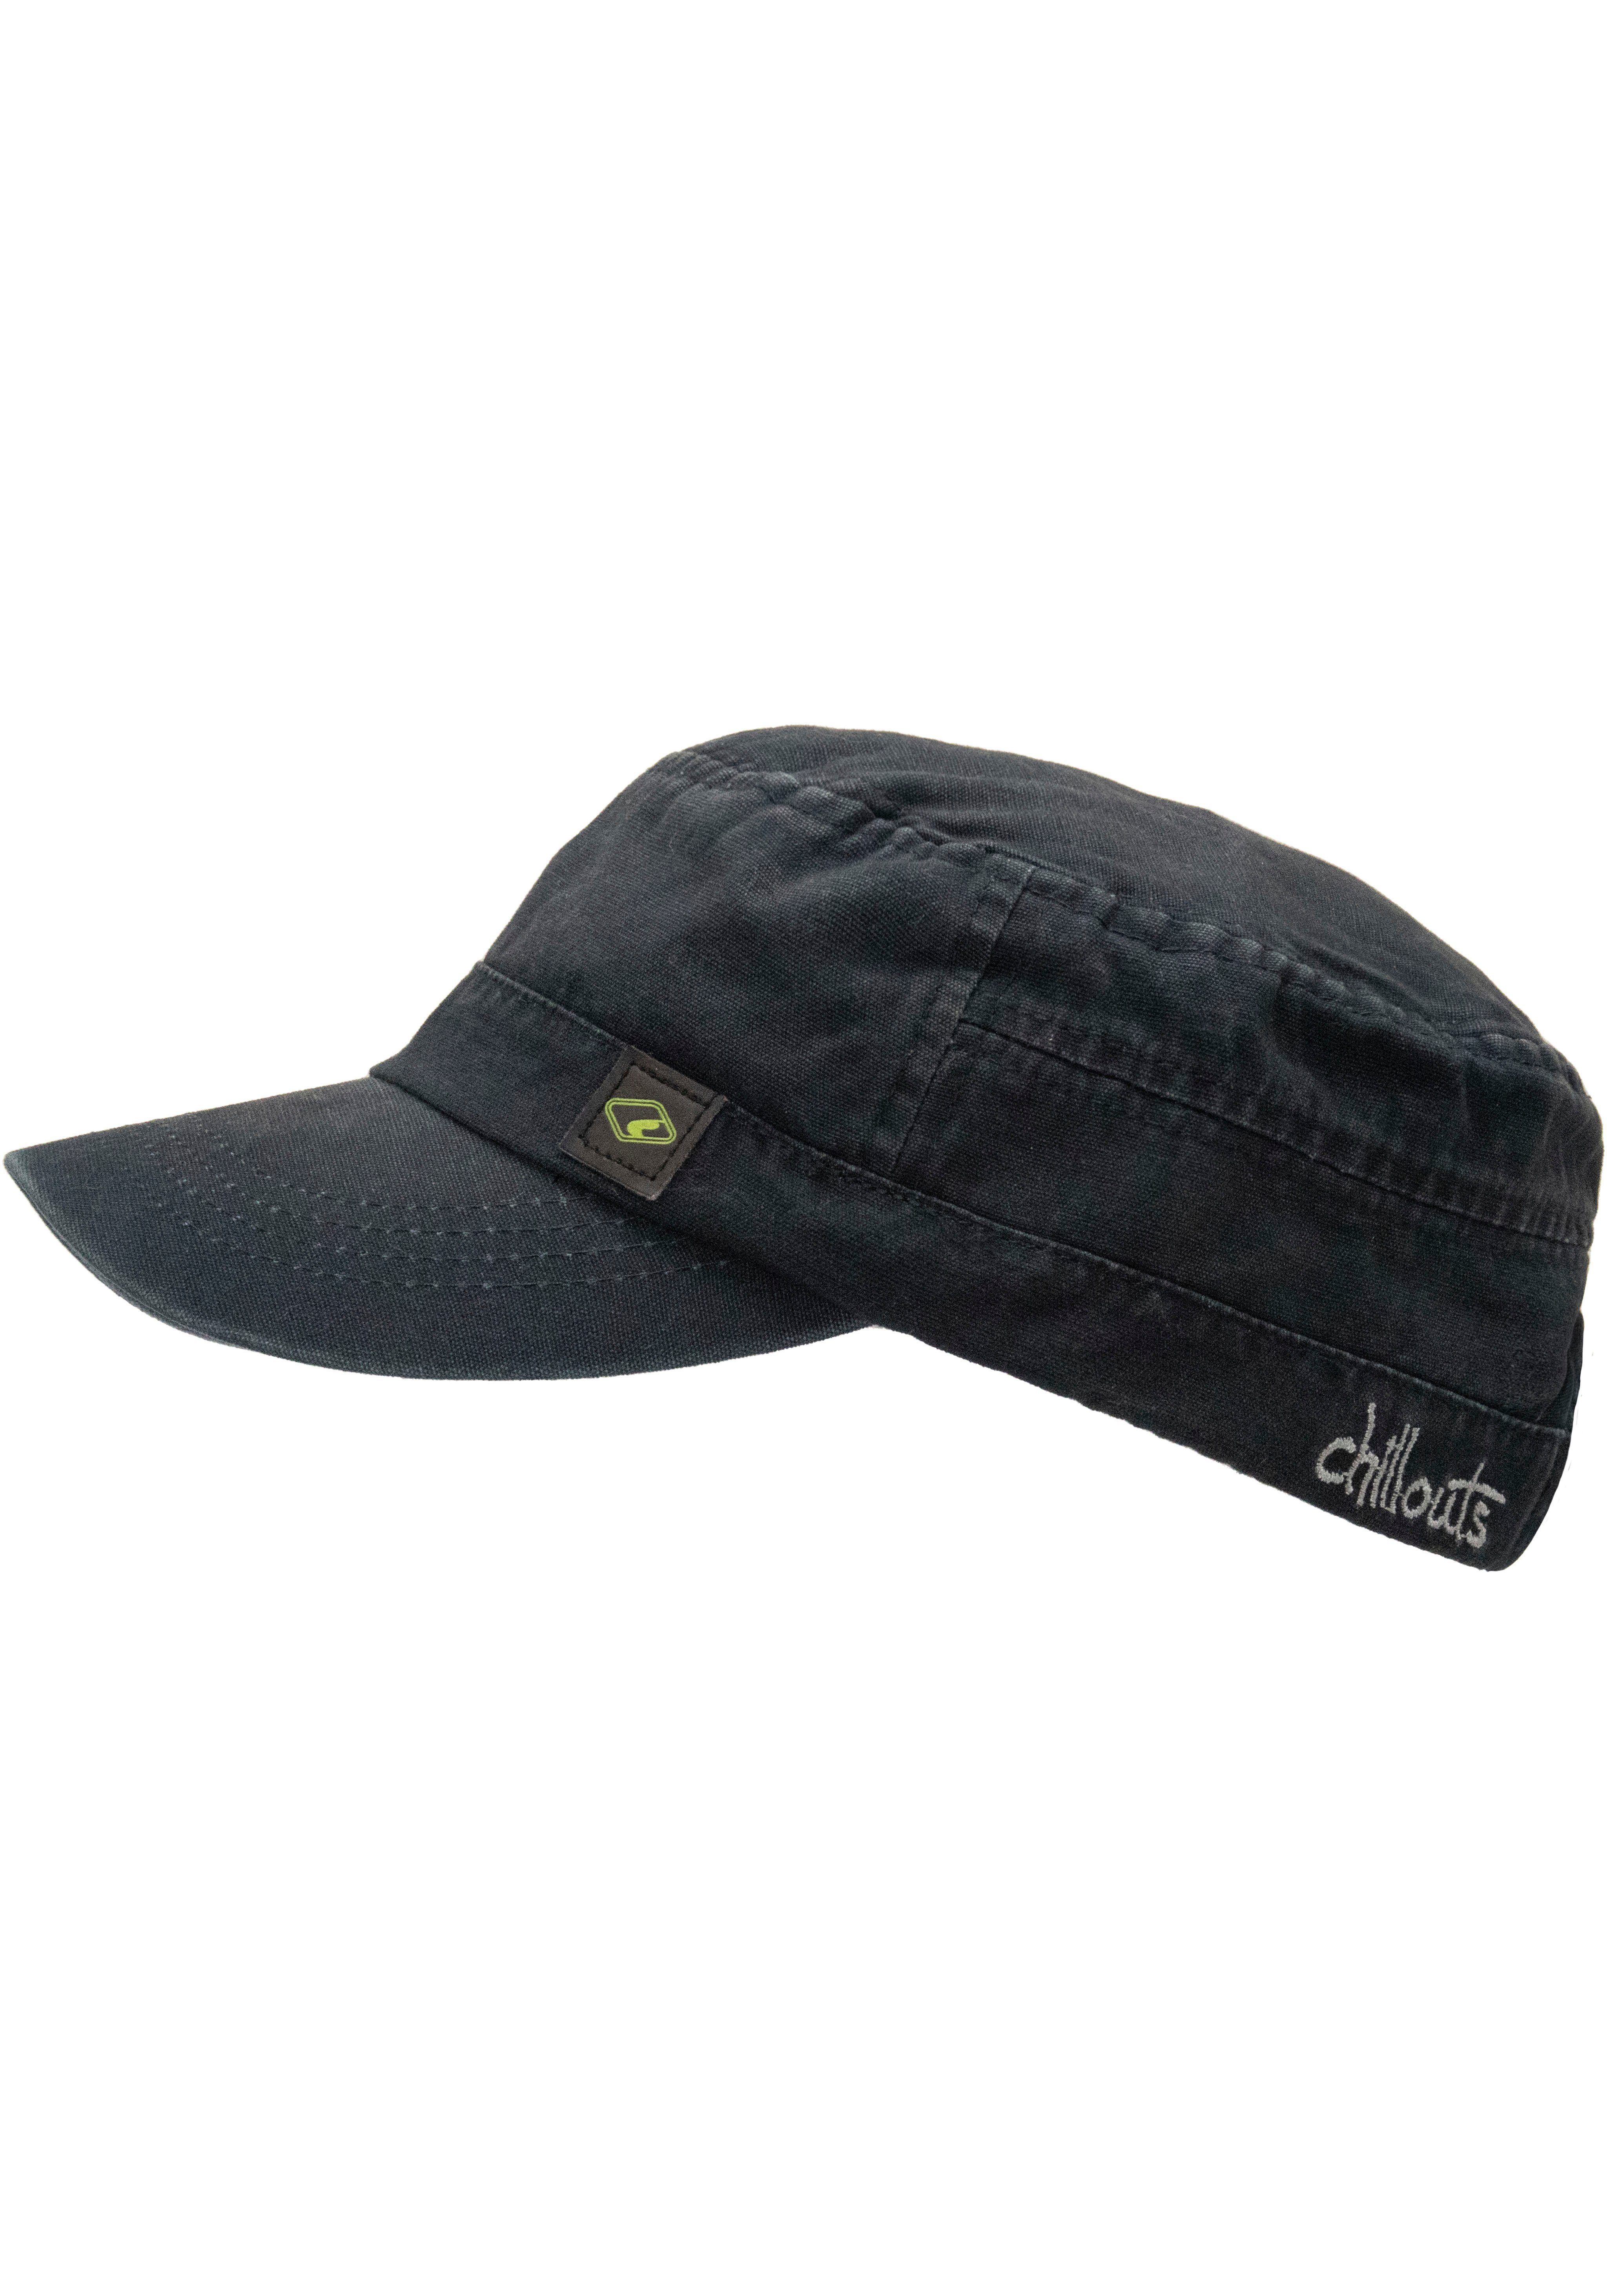 washed Size Paso atmungsaktiv, aus chillouts navy El Cap reiner One Army Hat Baumwolle,